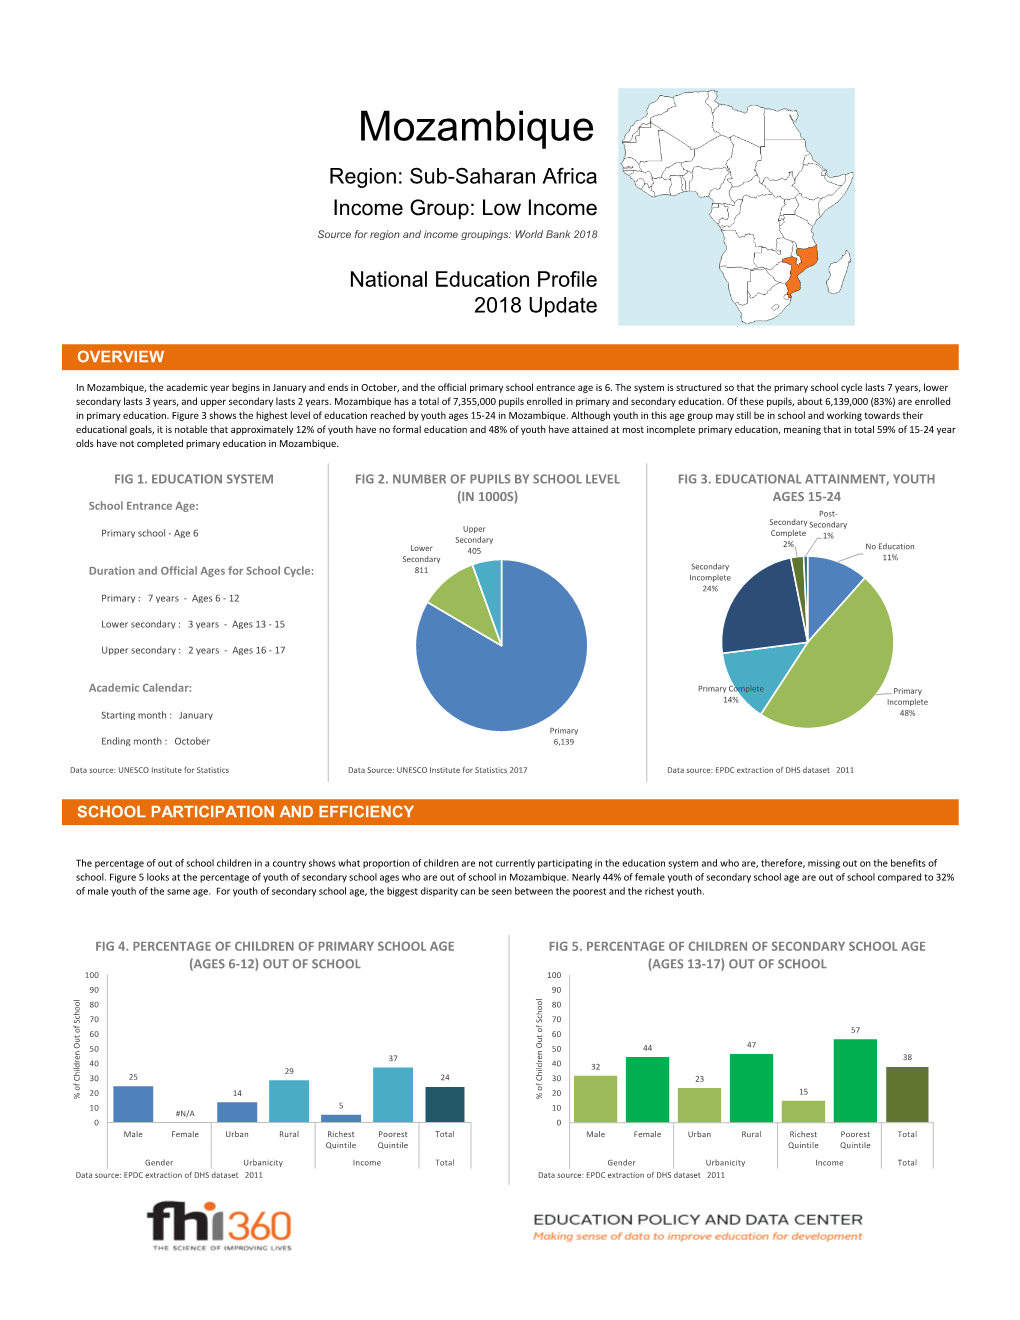 Mozambique Region: Sub-Saharan Africa Income Group: Low Income Source for Region and Income Groupings: World Bank 2018